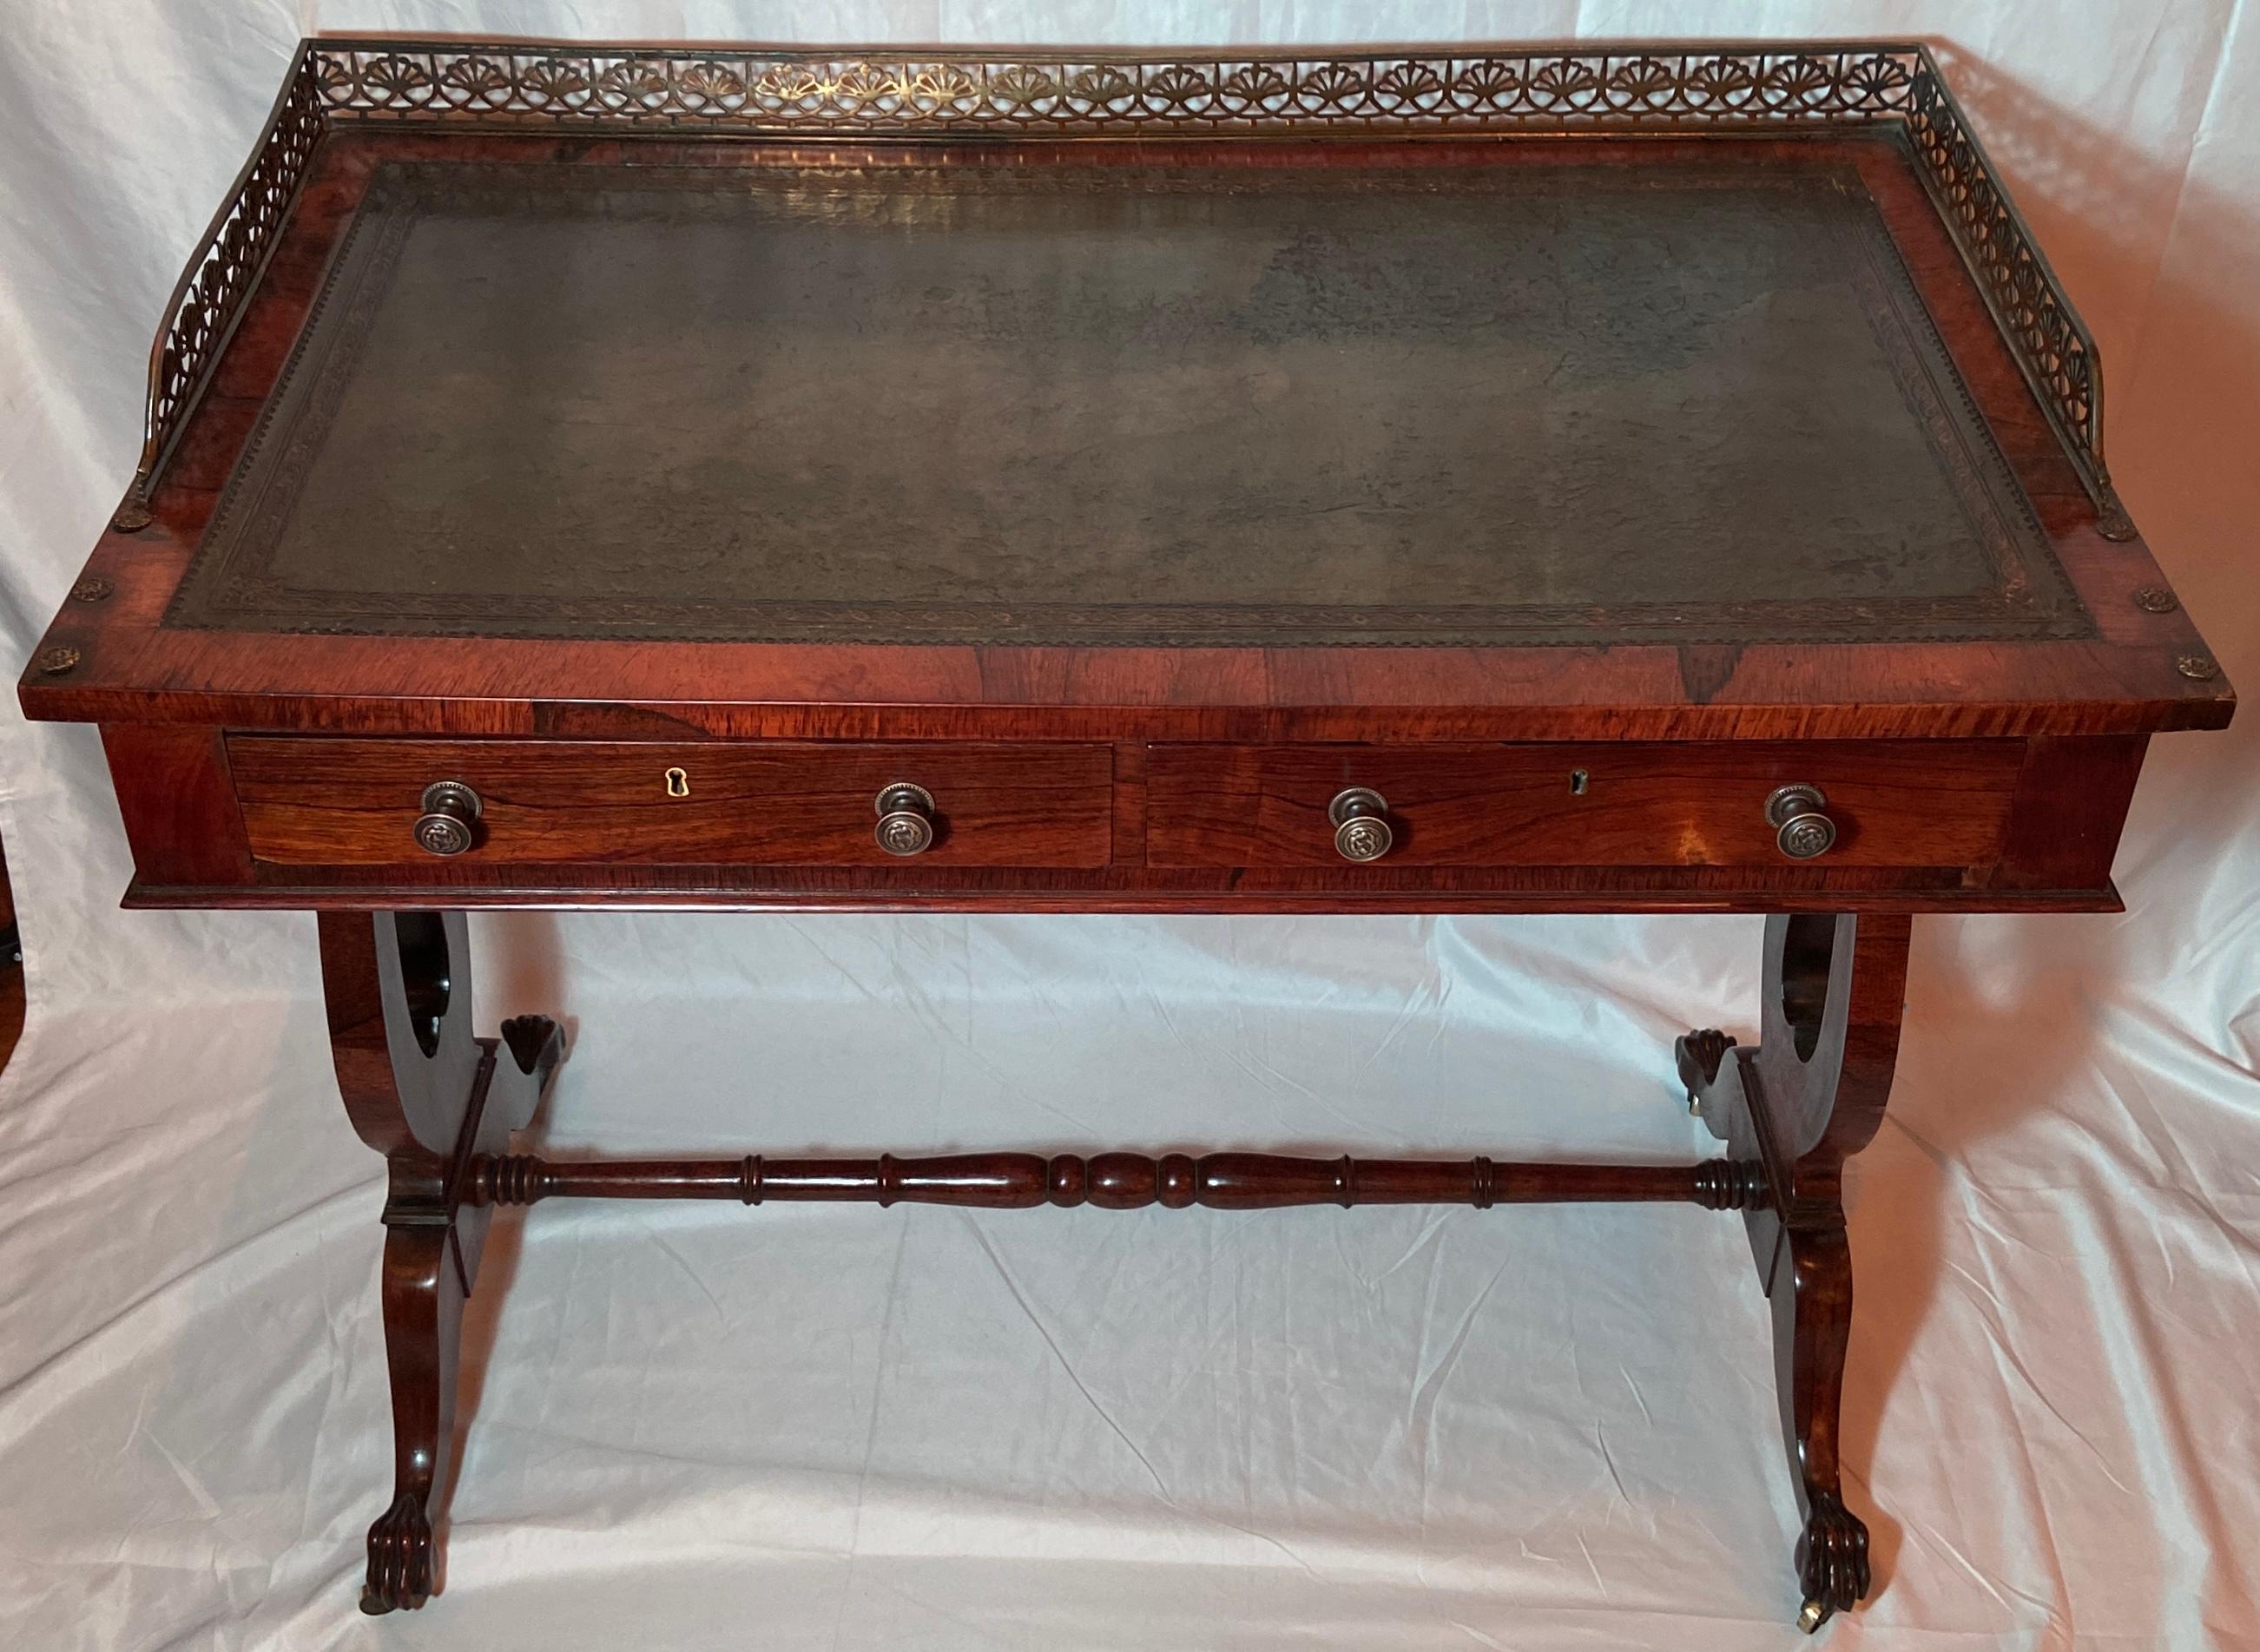 Antique English William IV period rosewood writing table, Circa 1830.
Galleried top with leather and on original casters.